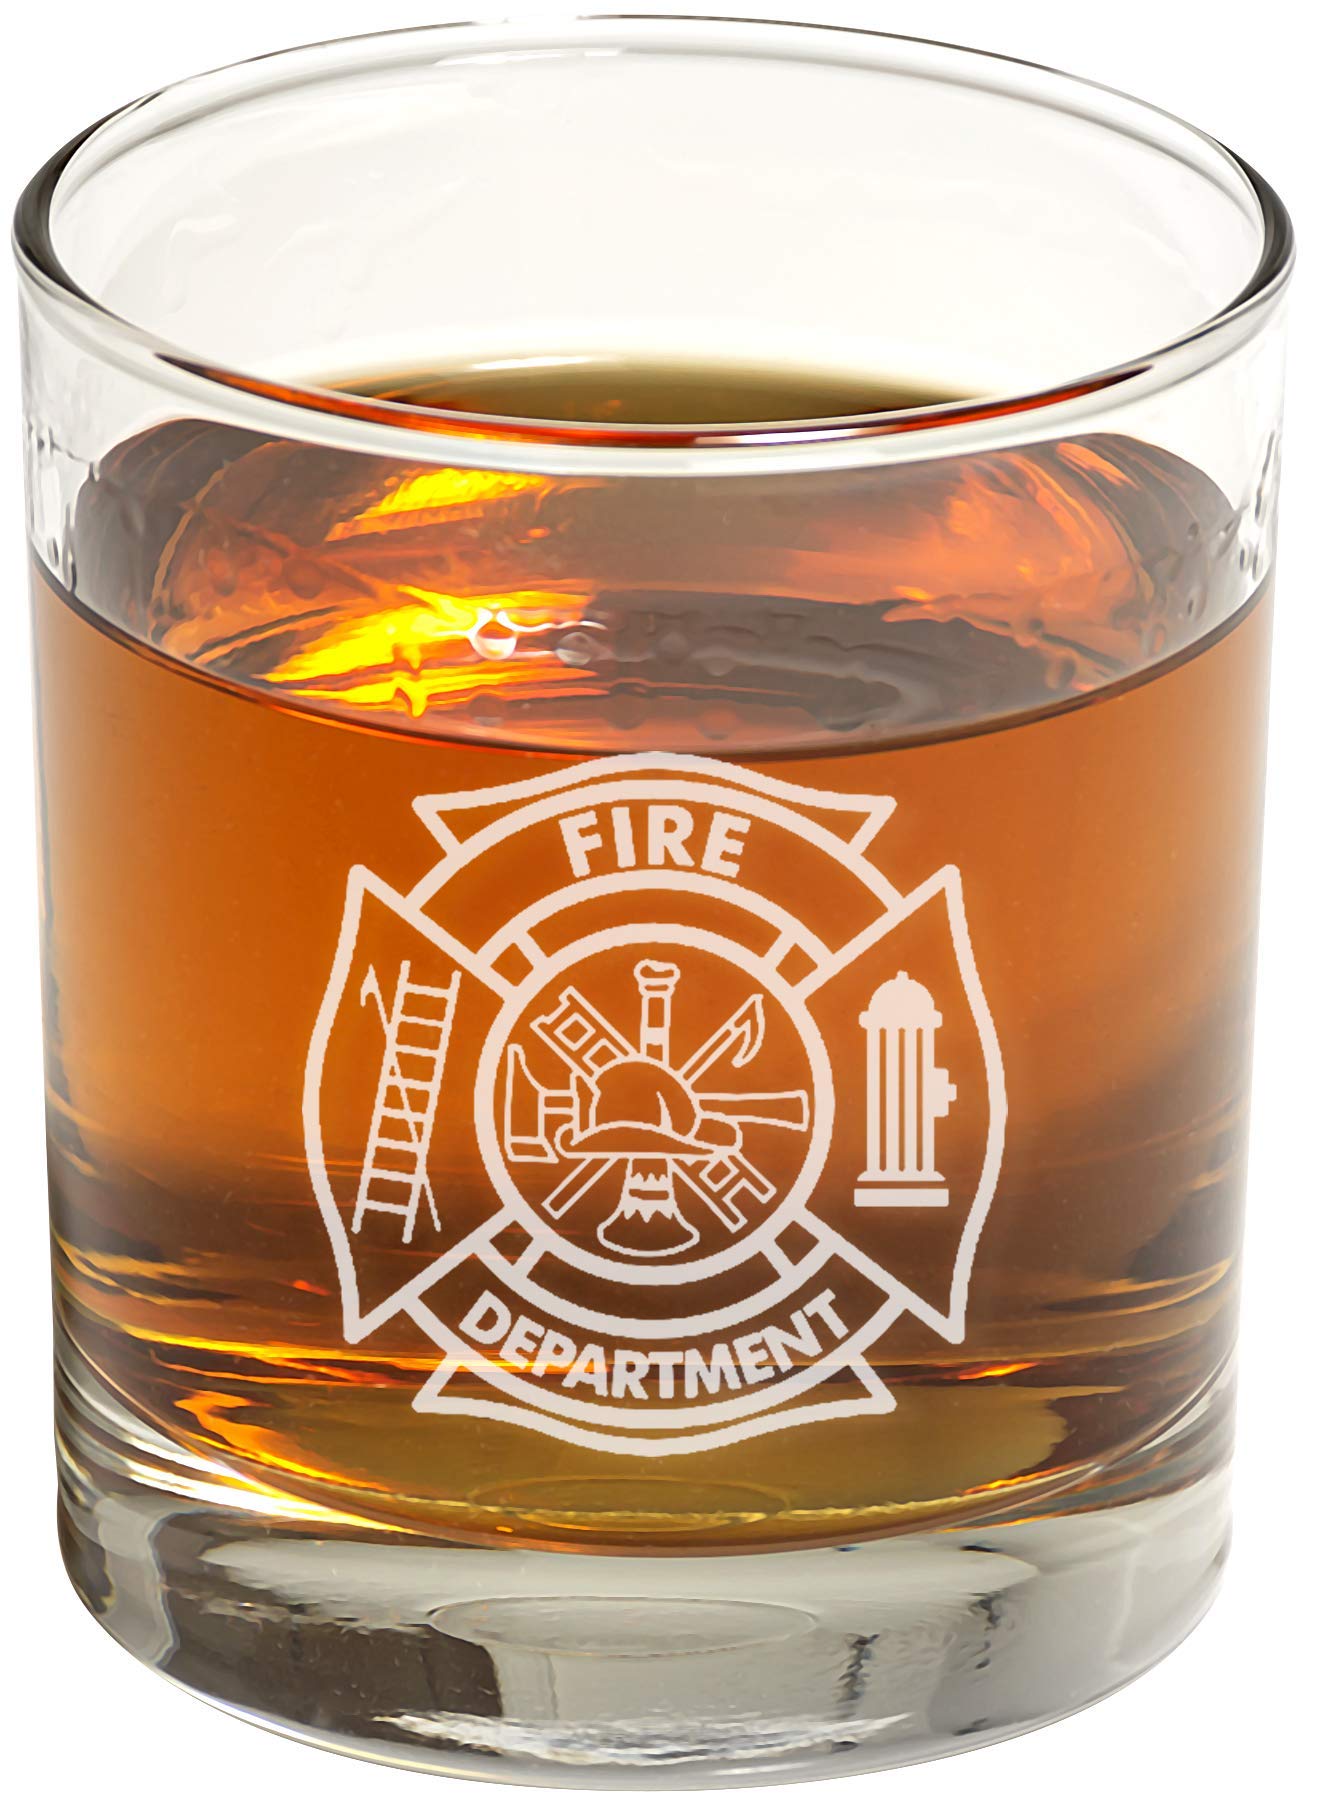 Firefighter Whiskey Glass (Set of Two) – Firefighter Engraved Exquisite Whiskey Glass - Gifts for Whiskey Lovers - Firefighter Present for Retirement, Graduation, Birthday – Firefighter Home Décor